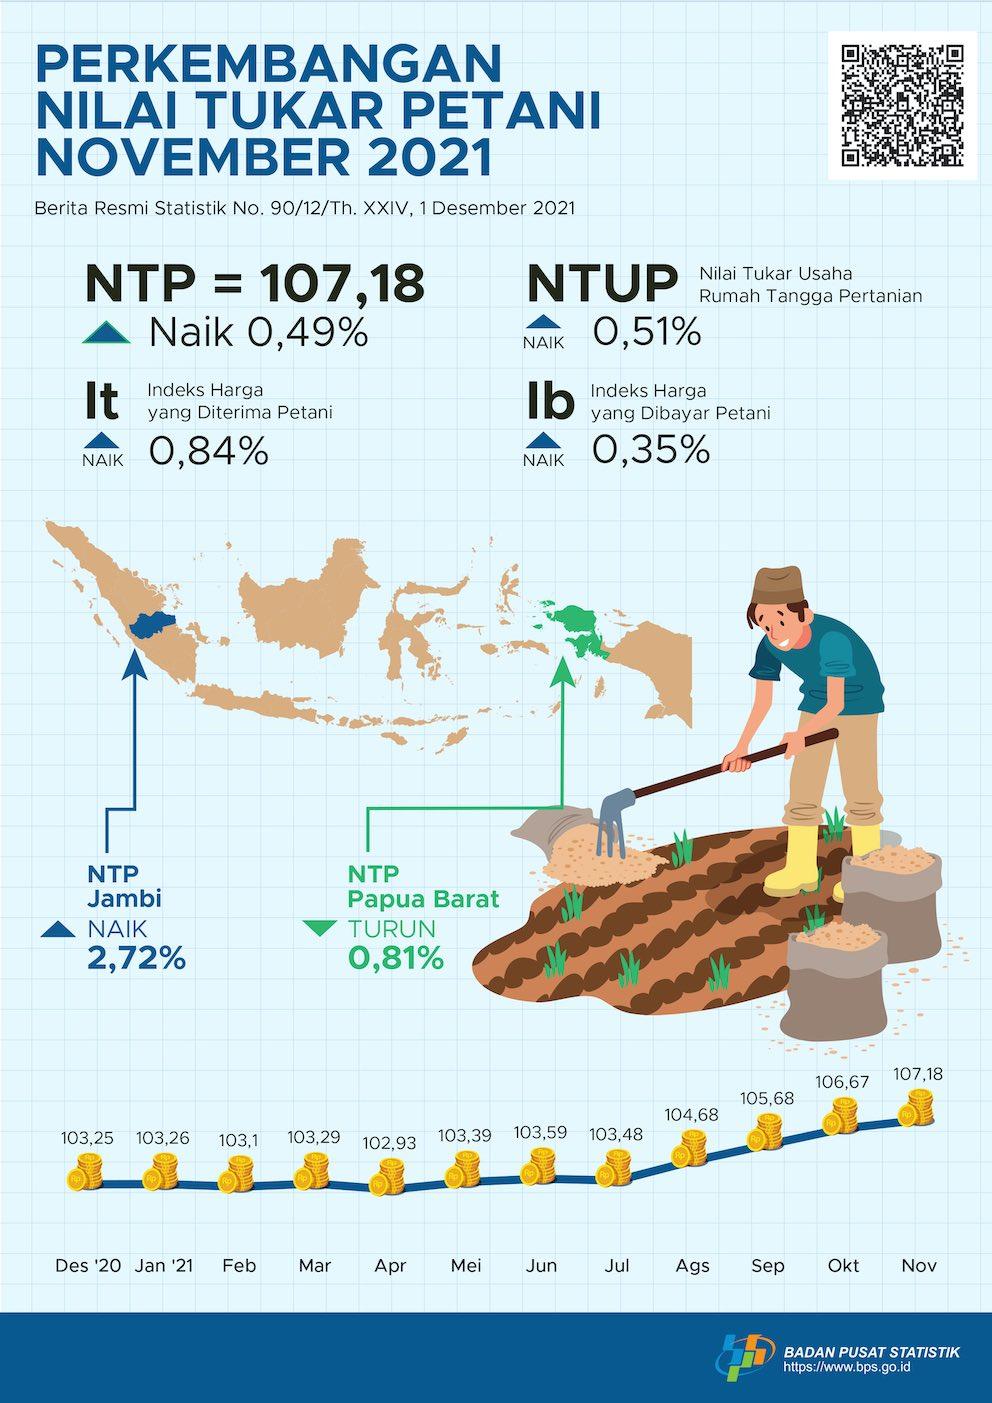 Farmers’ Terms of Trade (FTT) in November 2021 was 107.18 or up 0.49 percent